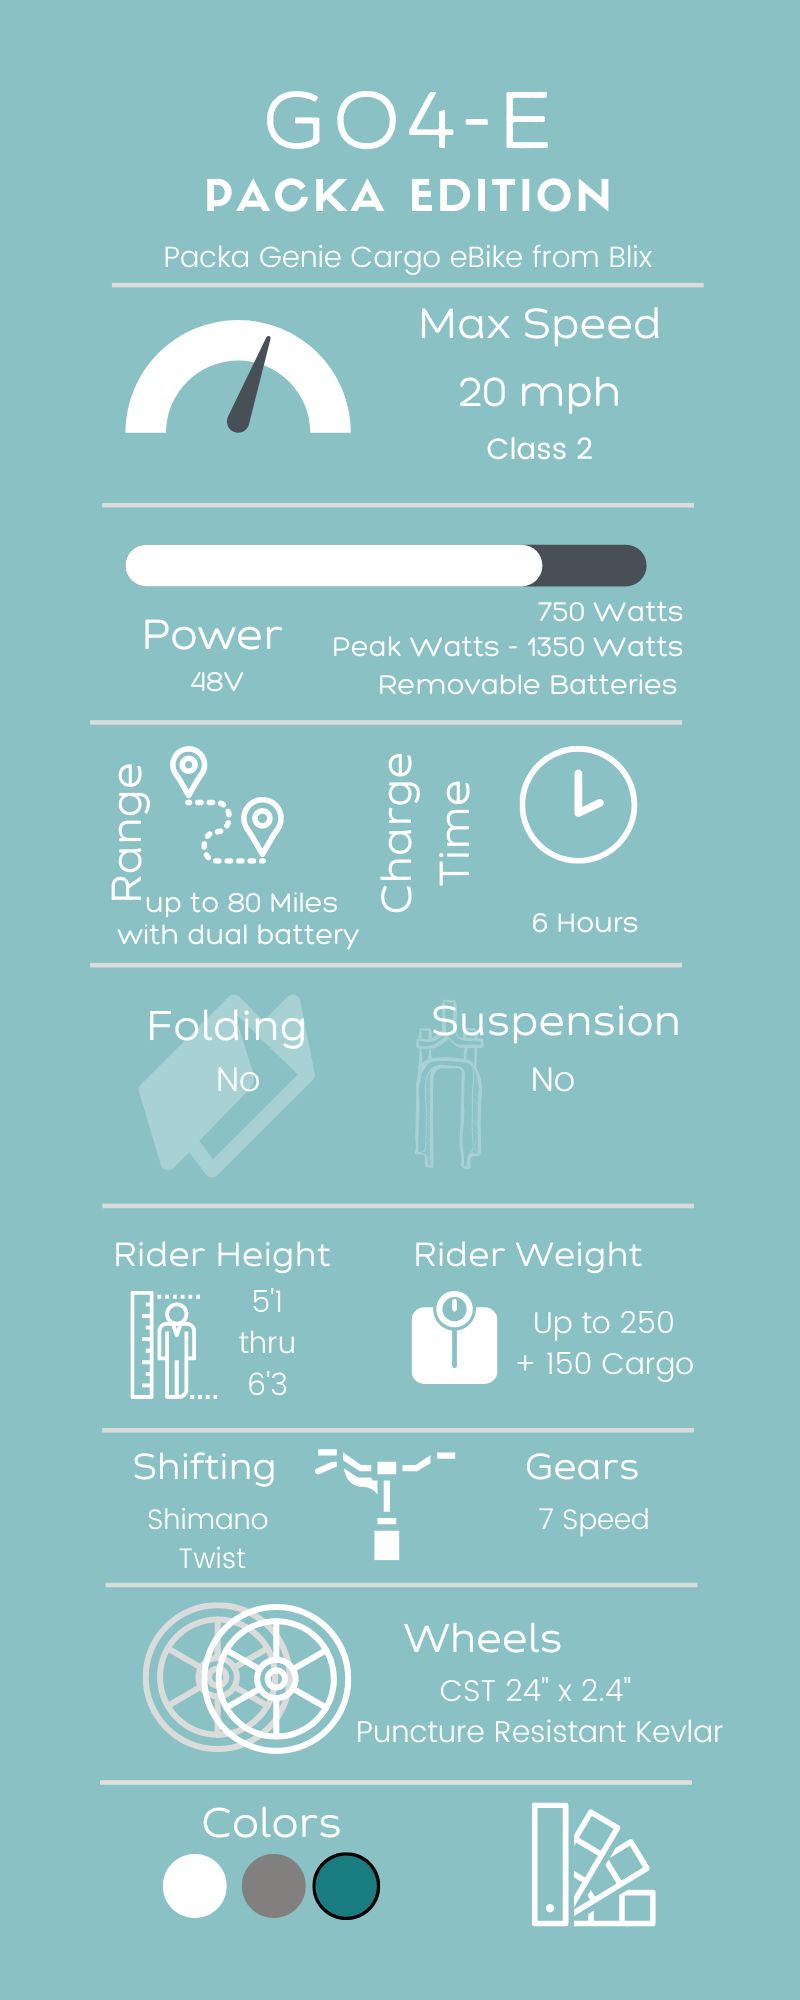 Infographic about the VeeGo Semi-Fat SR eBike from Ride Scoozy that is compatible with the Go4-E Connection Kit to create a Blackbird Bikes Sociable Tandem side-by-side quadribike. This 4 wheel bicycle offers a stable ride inclusive for all abilities and adaptive to special needs riders.